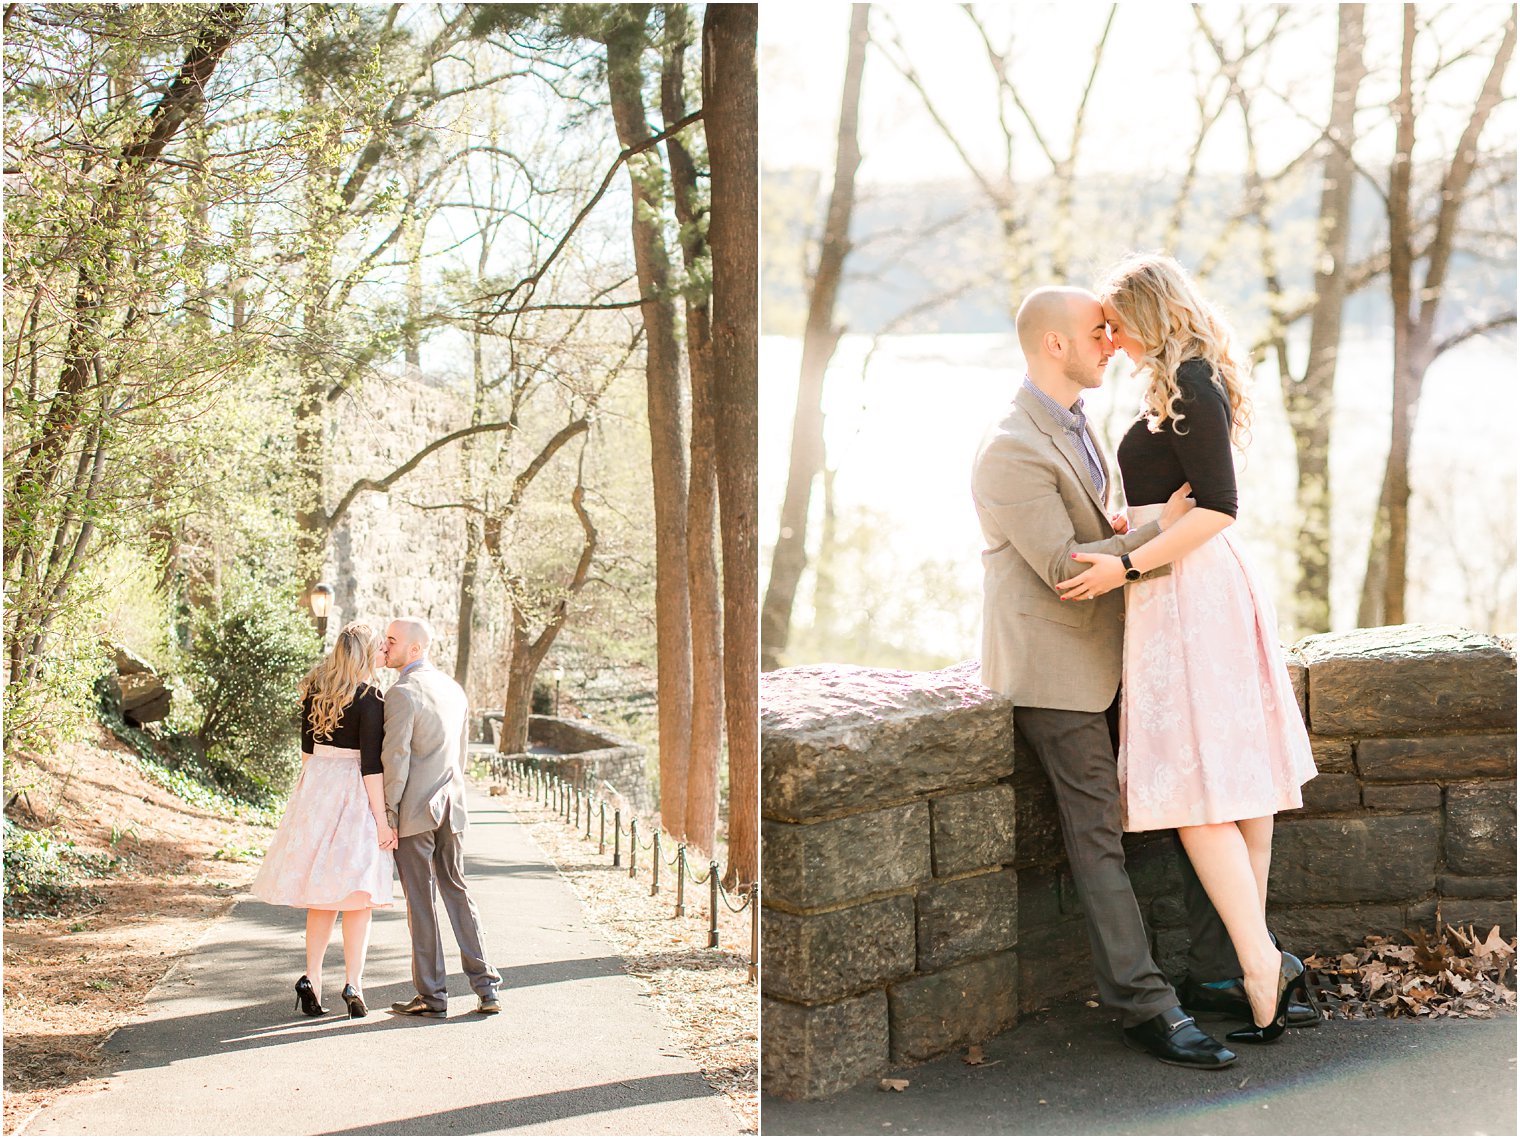 NYC Engagement Photos at Fort Tryon Park by NYC Engagement Photographers Idalia Photography